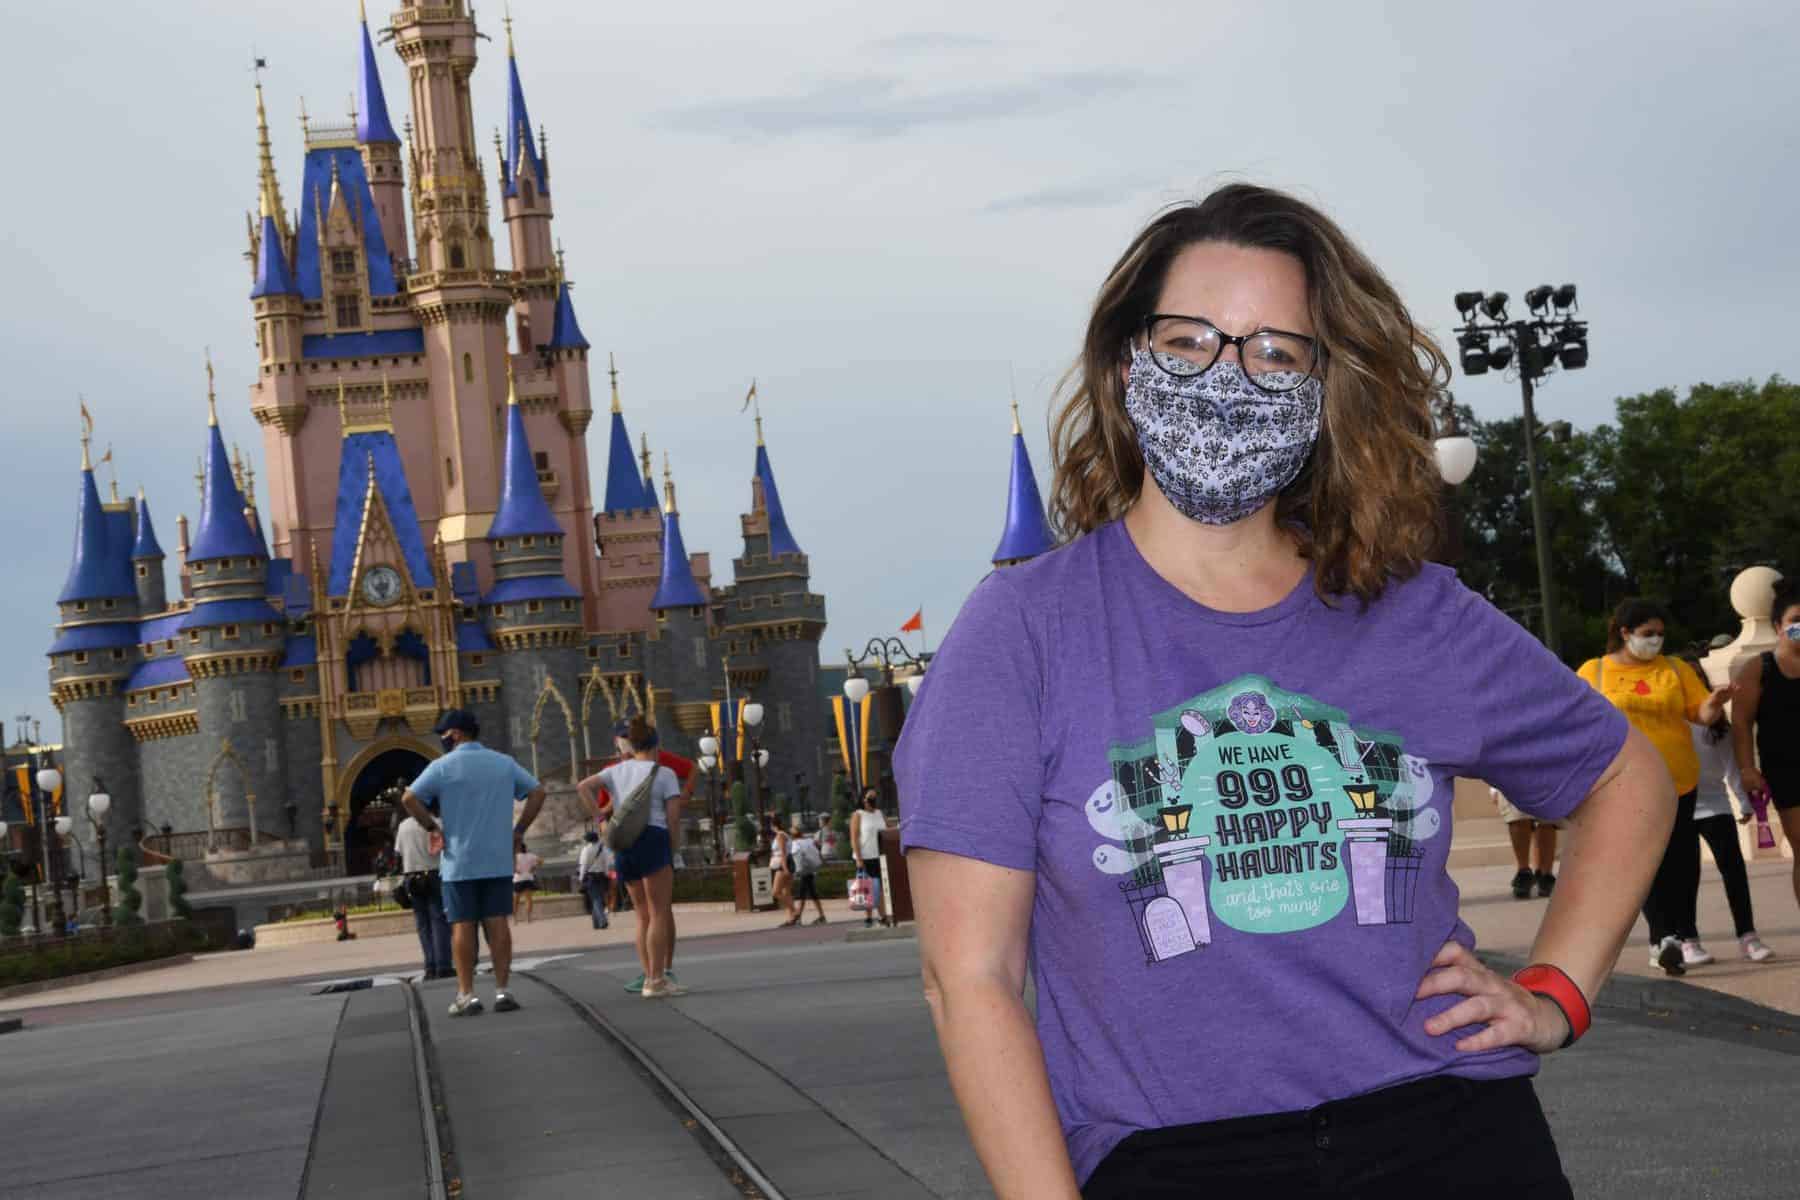 Disney World Announces Temporary Mask Removal When Taking Outdoor Photos